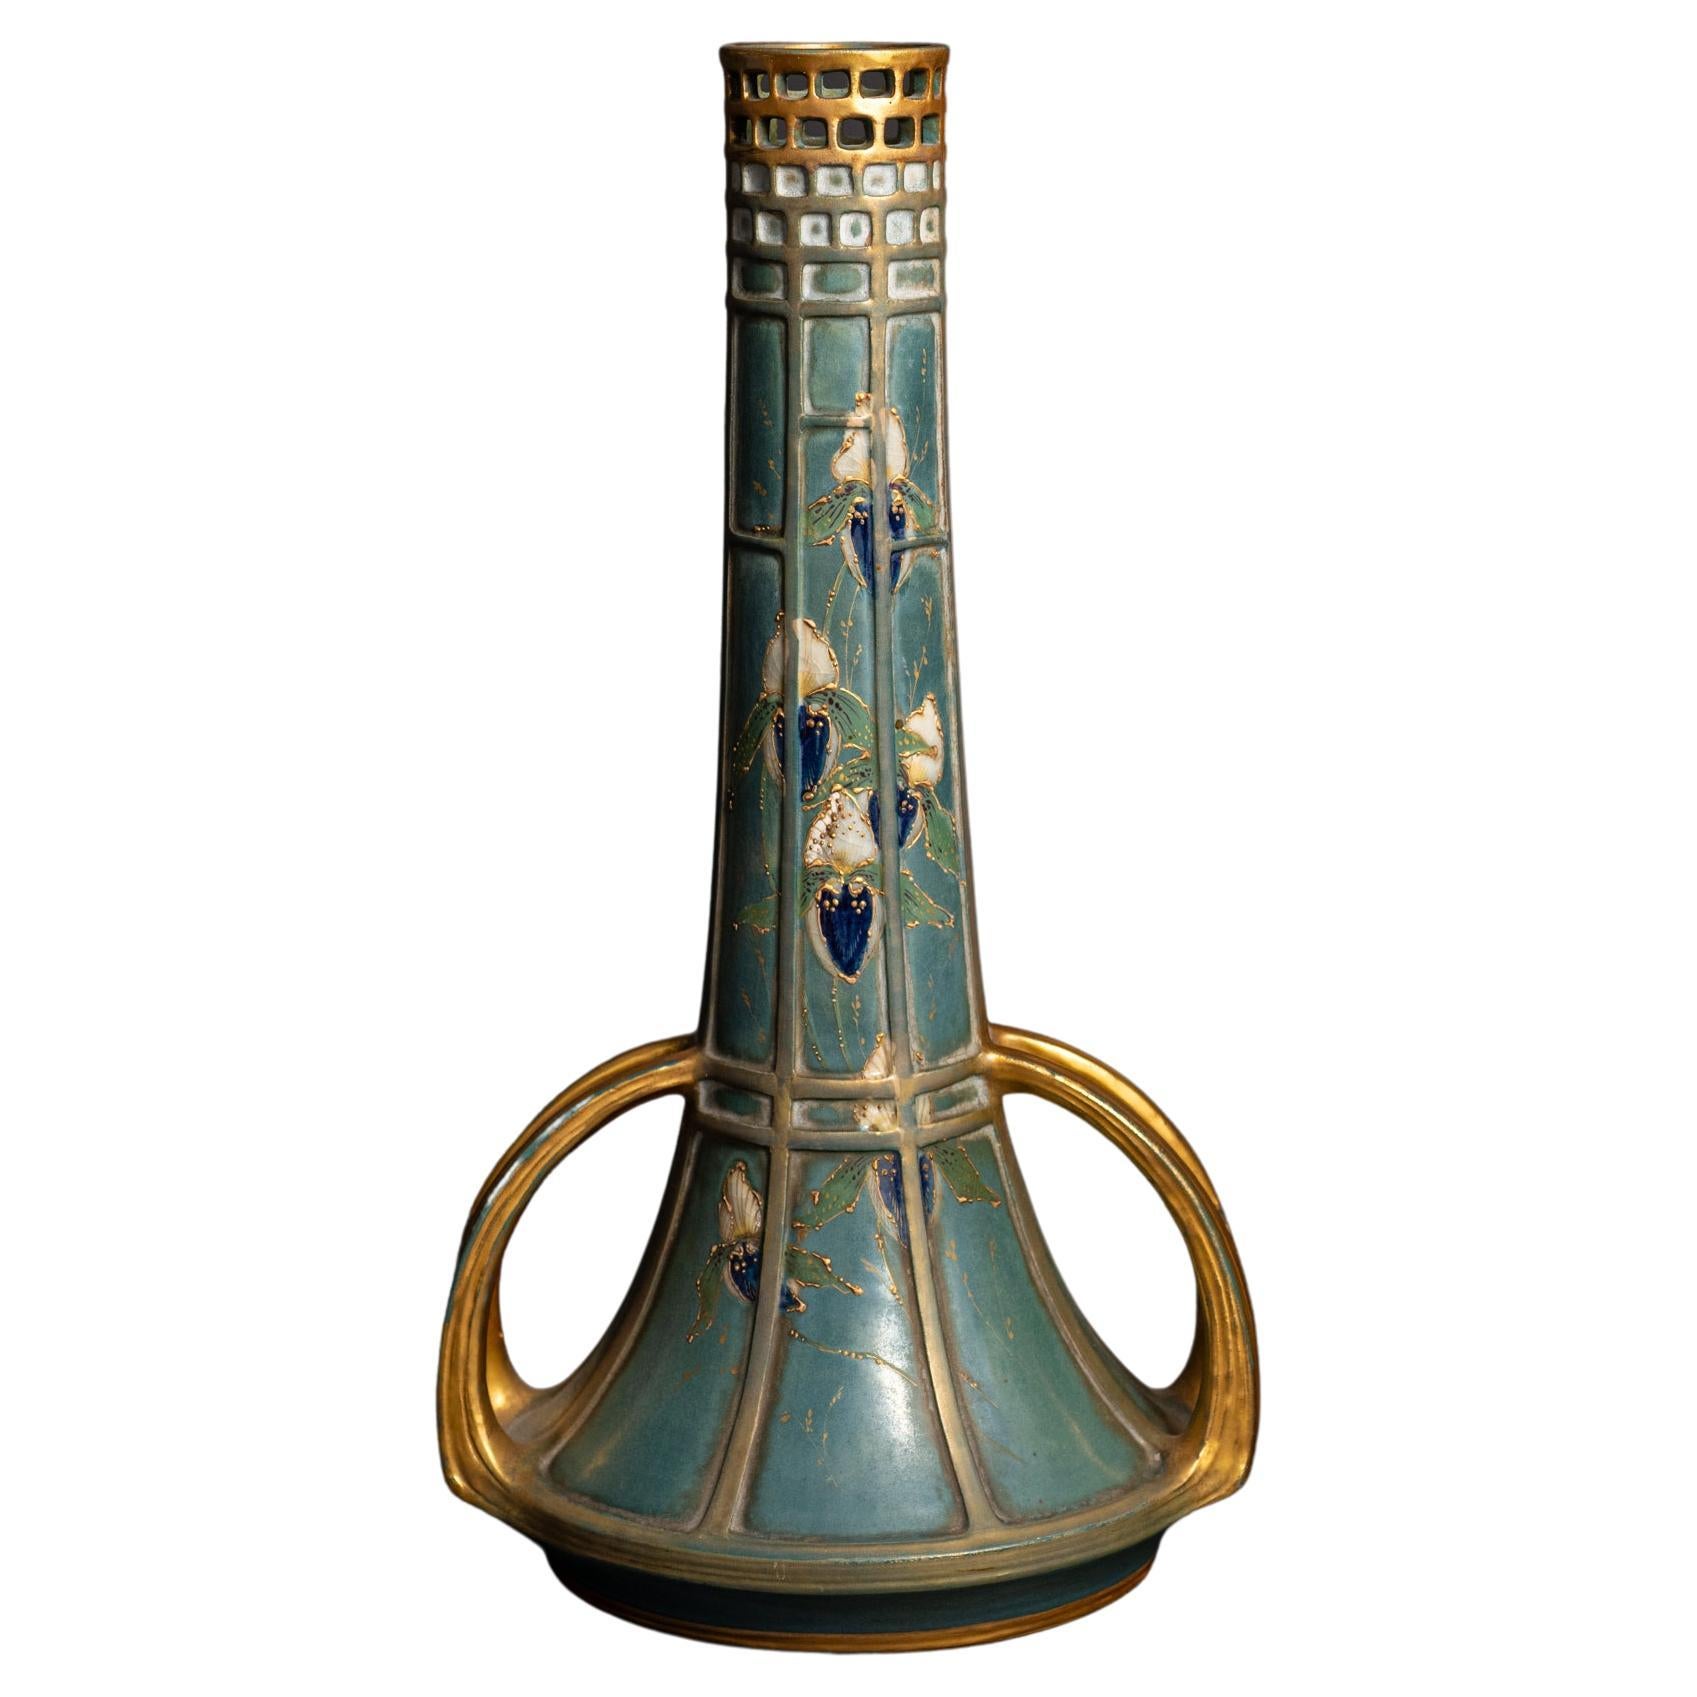 Two-Handled Reticulated Art Nouveau Vase with Enamel Flowers by Paul Dachsel